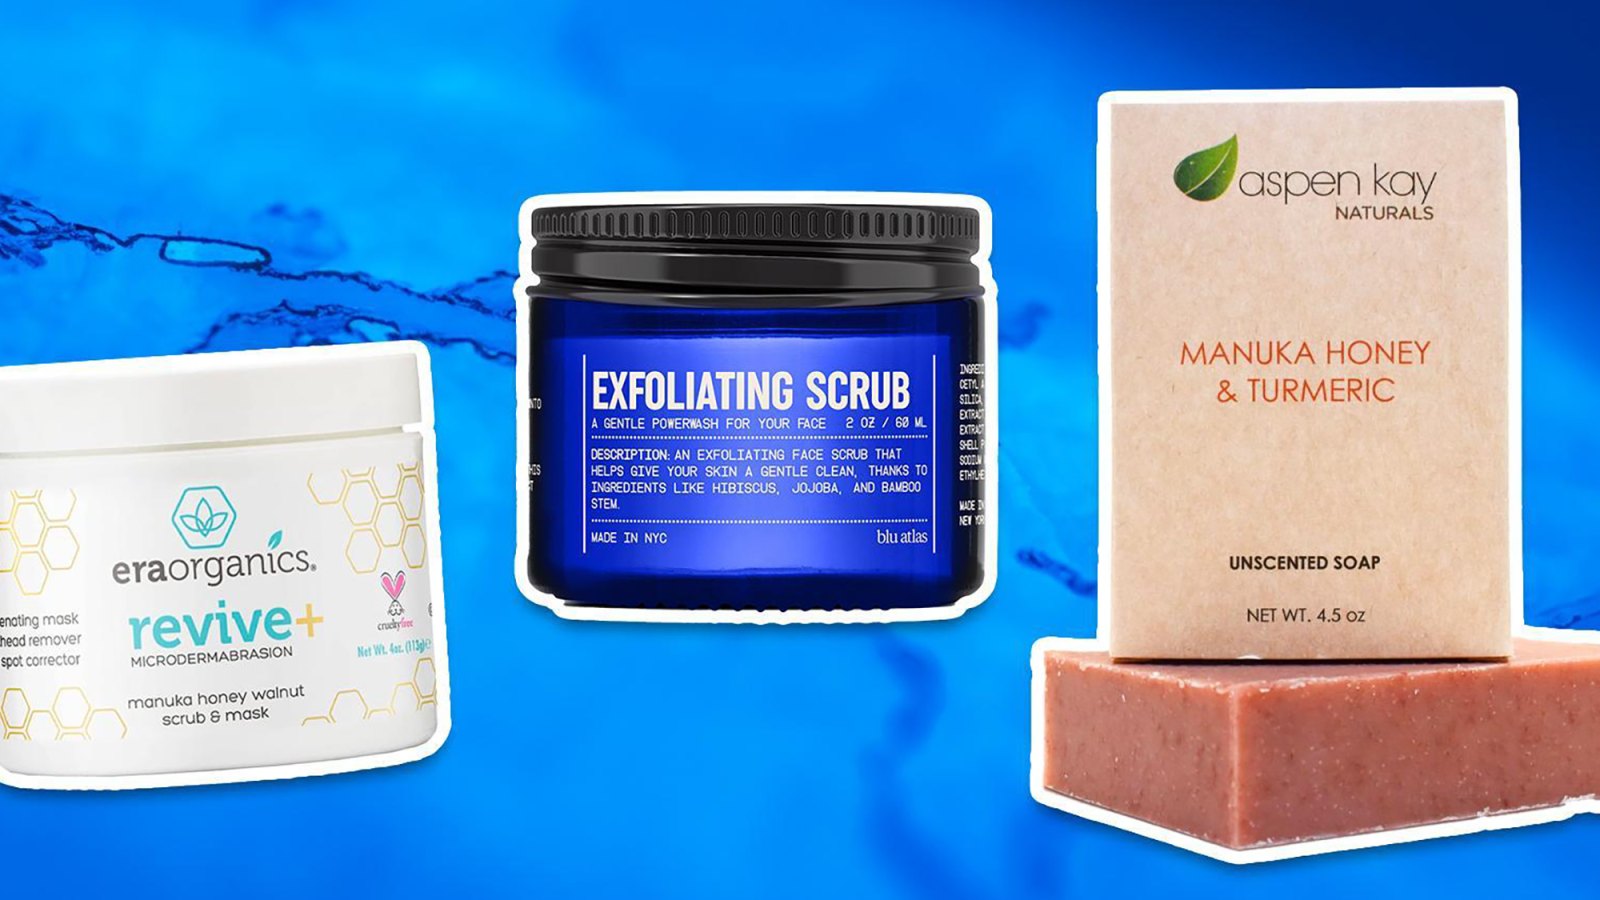 3 Of The Best Natural Beauty Products For Your Kit